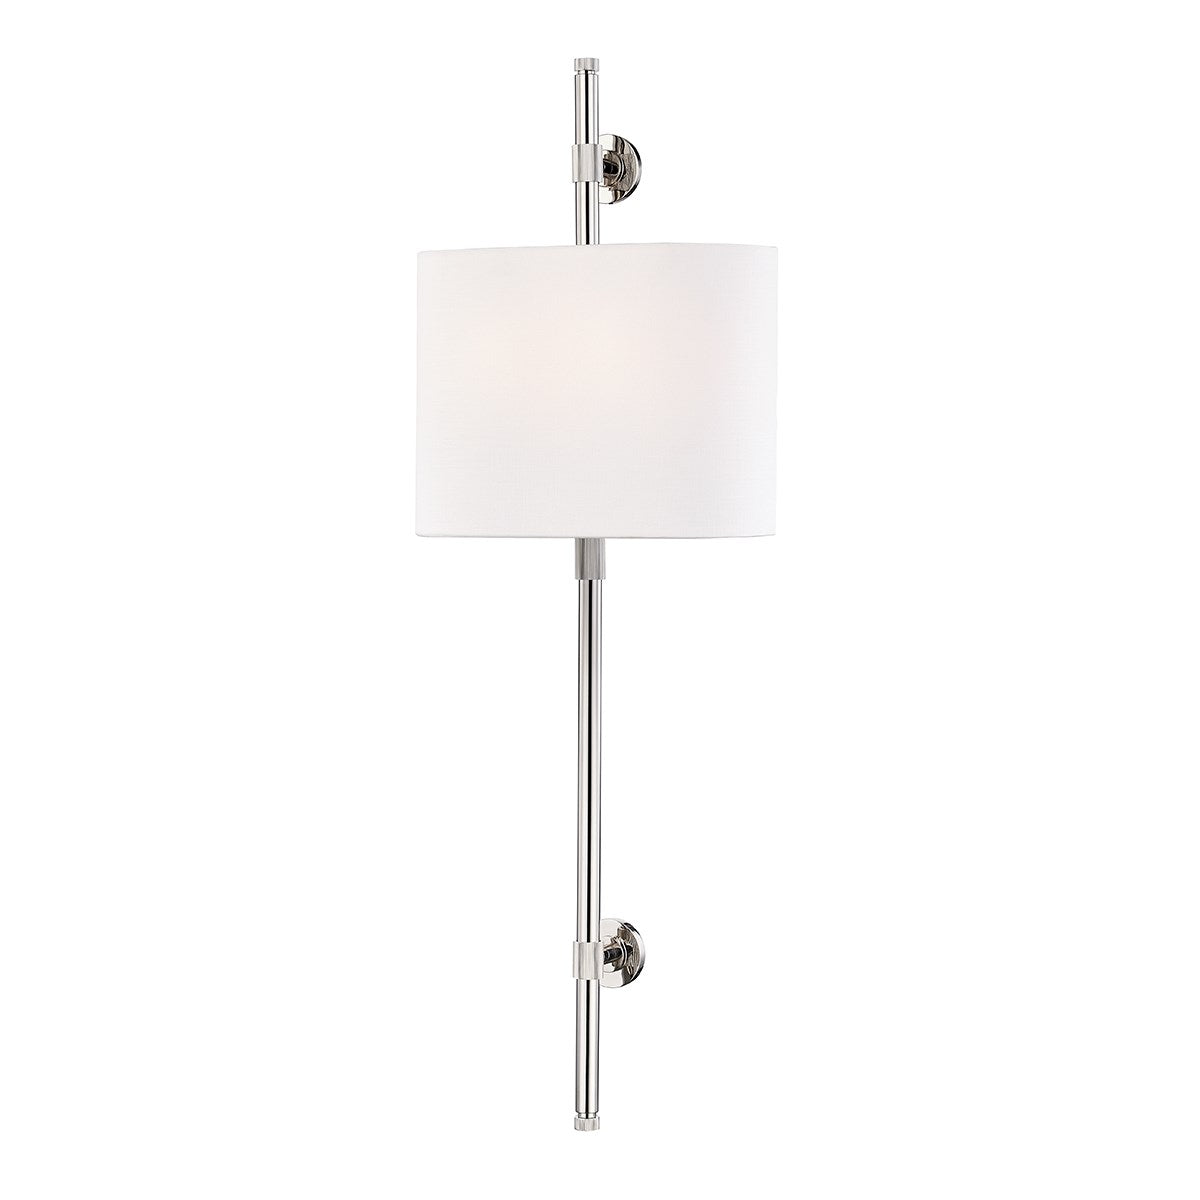 Bowery - 2 LIGHT WALL SCONCE Wall Light Fixtures Hudson Valley Polished Nickel  